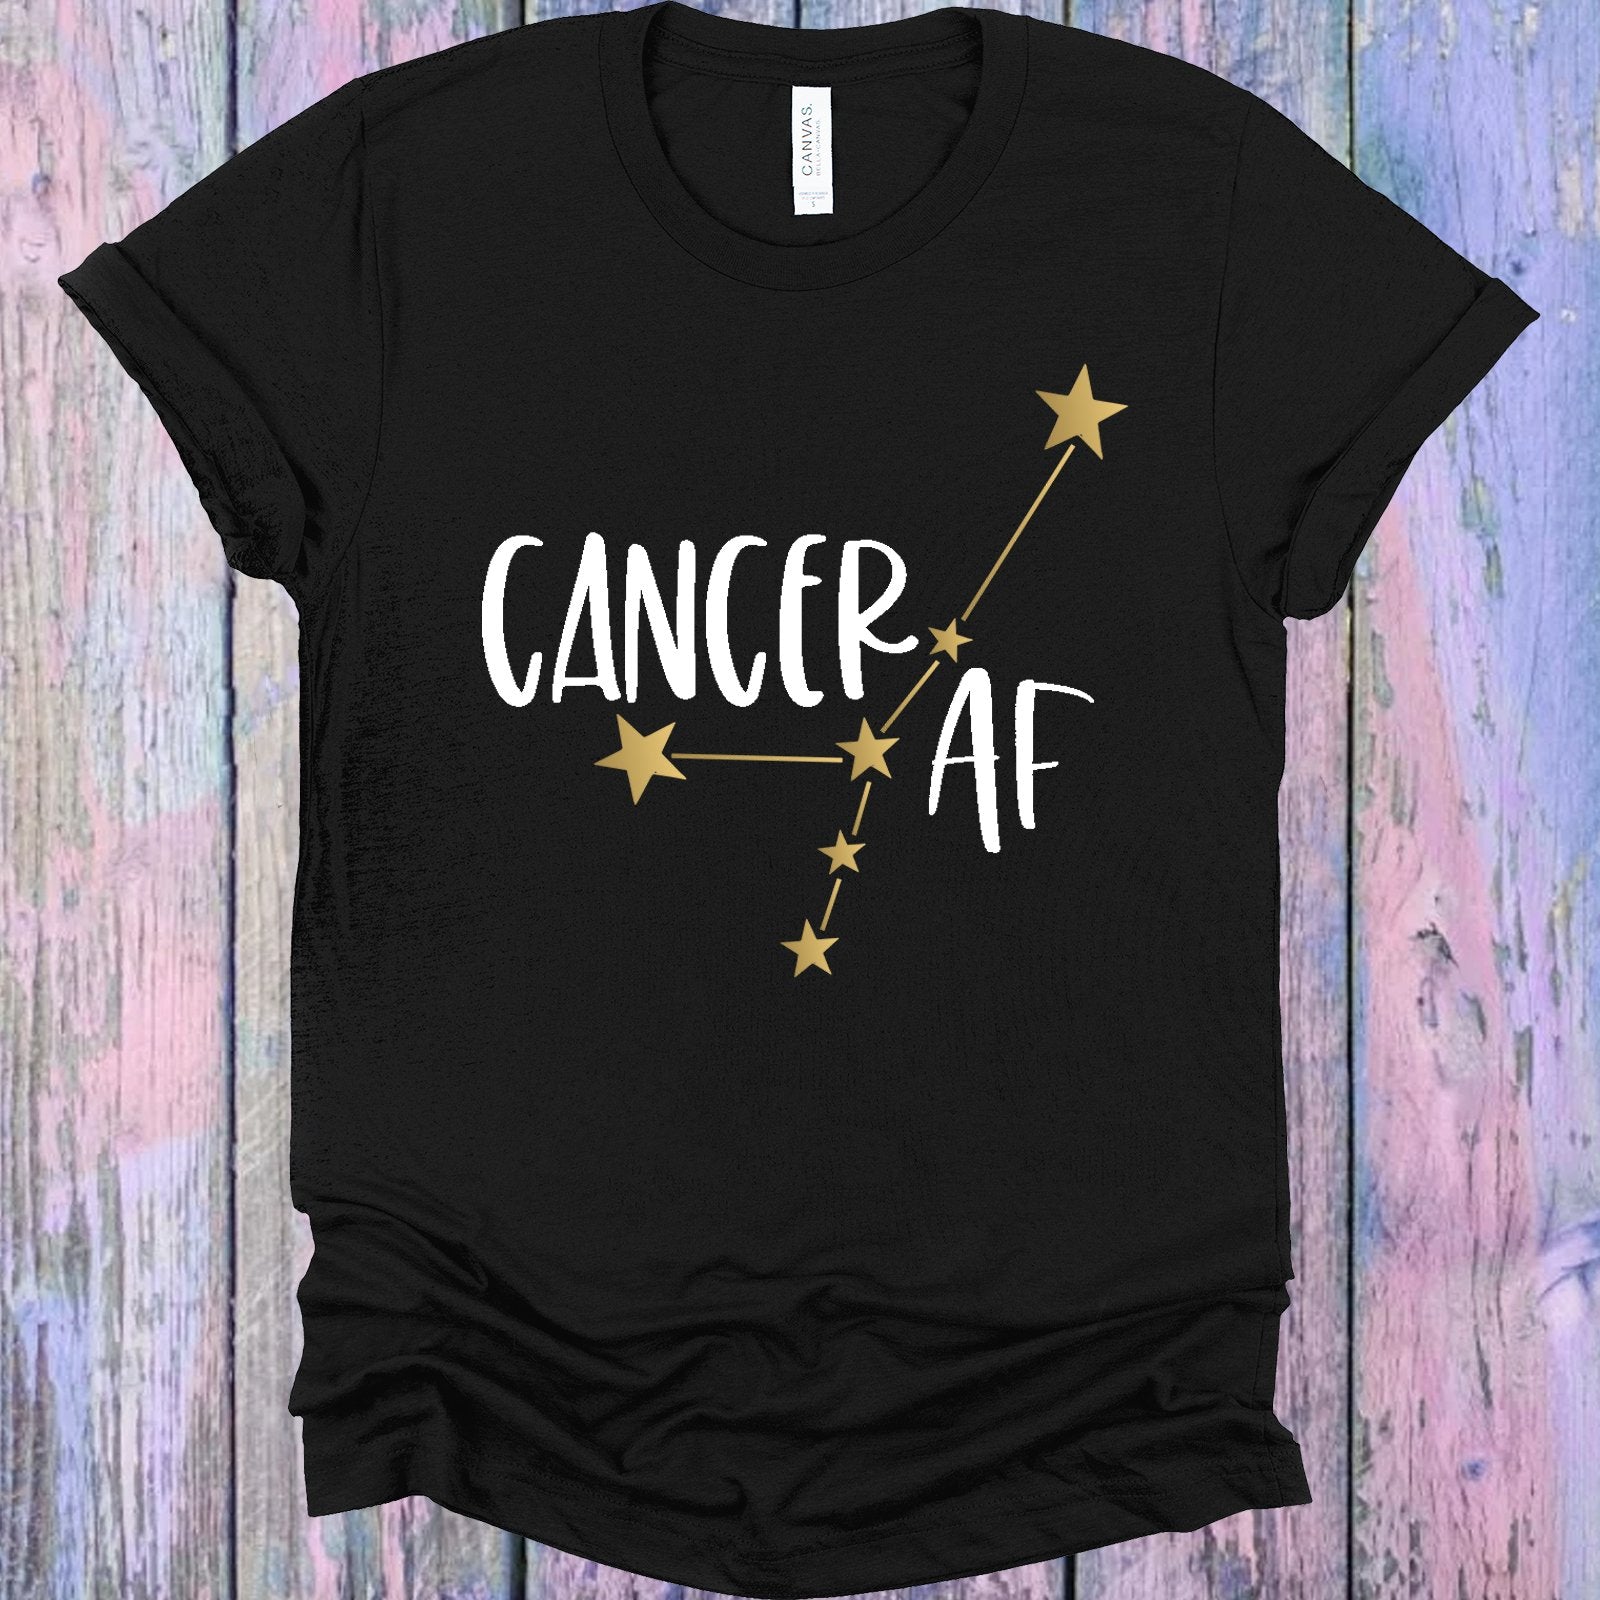 Cancer Af Graphic Tee Graphic Tee